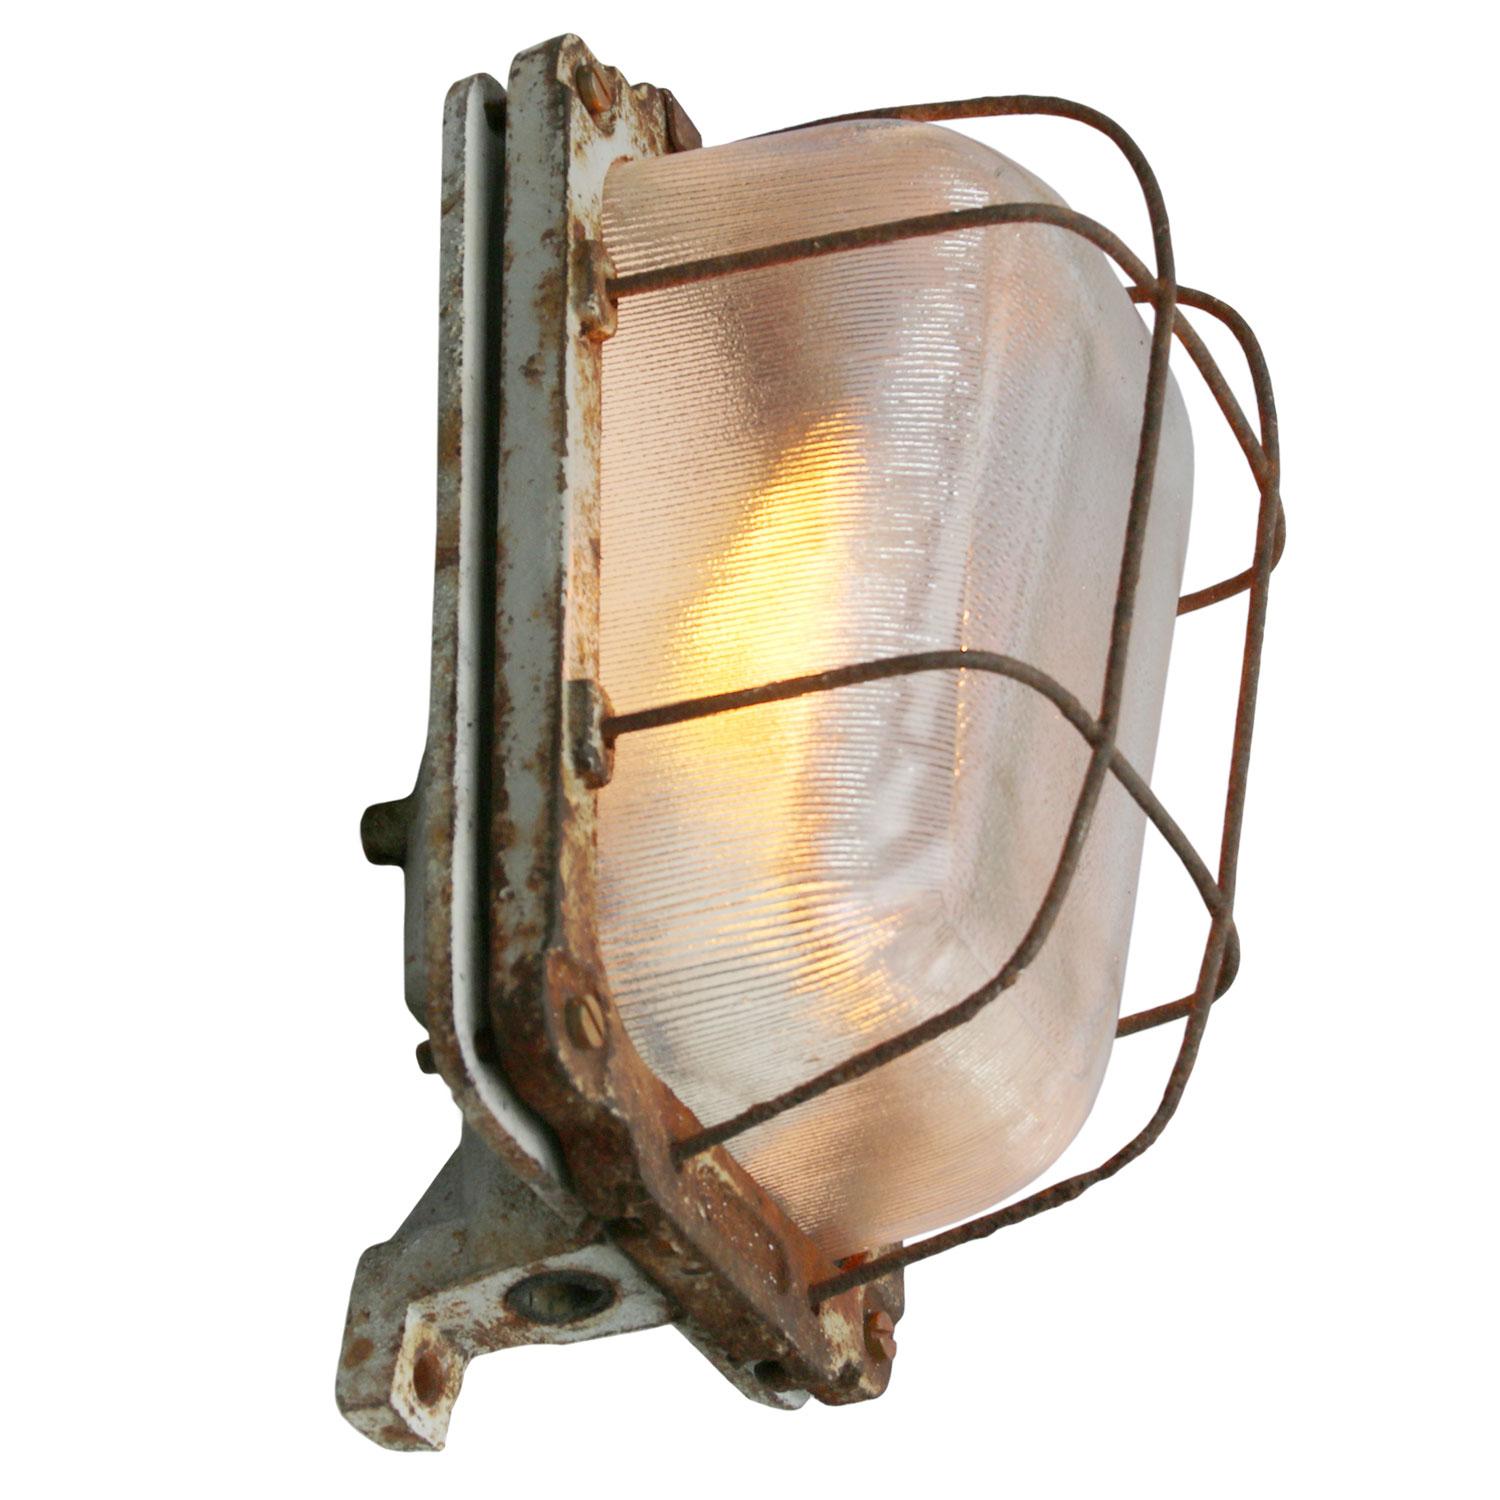 Industrial wall-ceiling scone
cast iron striped clear glass

Weight: 4.50 kg / 9.9 lb

Priced per individual item. All lamps have been made suitable by international standards for incandescent light bulbs, energy-efficient and LED bulbs. E26/E27